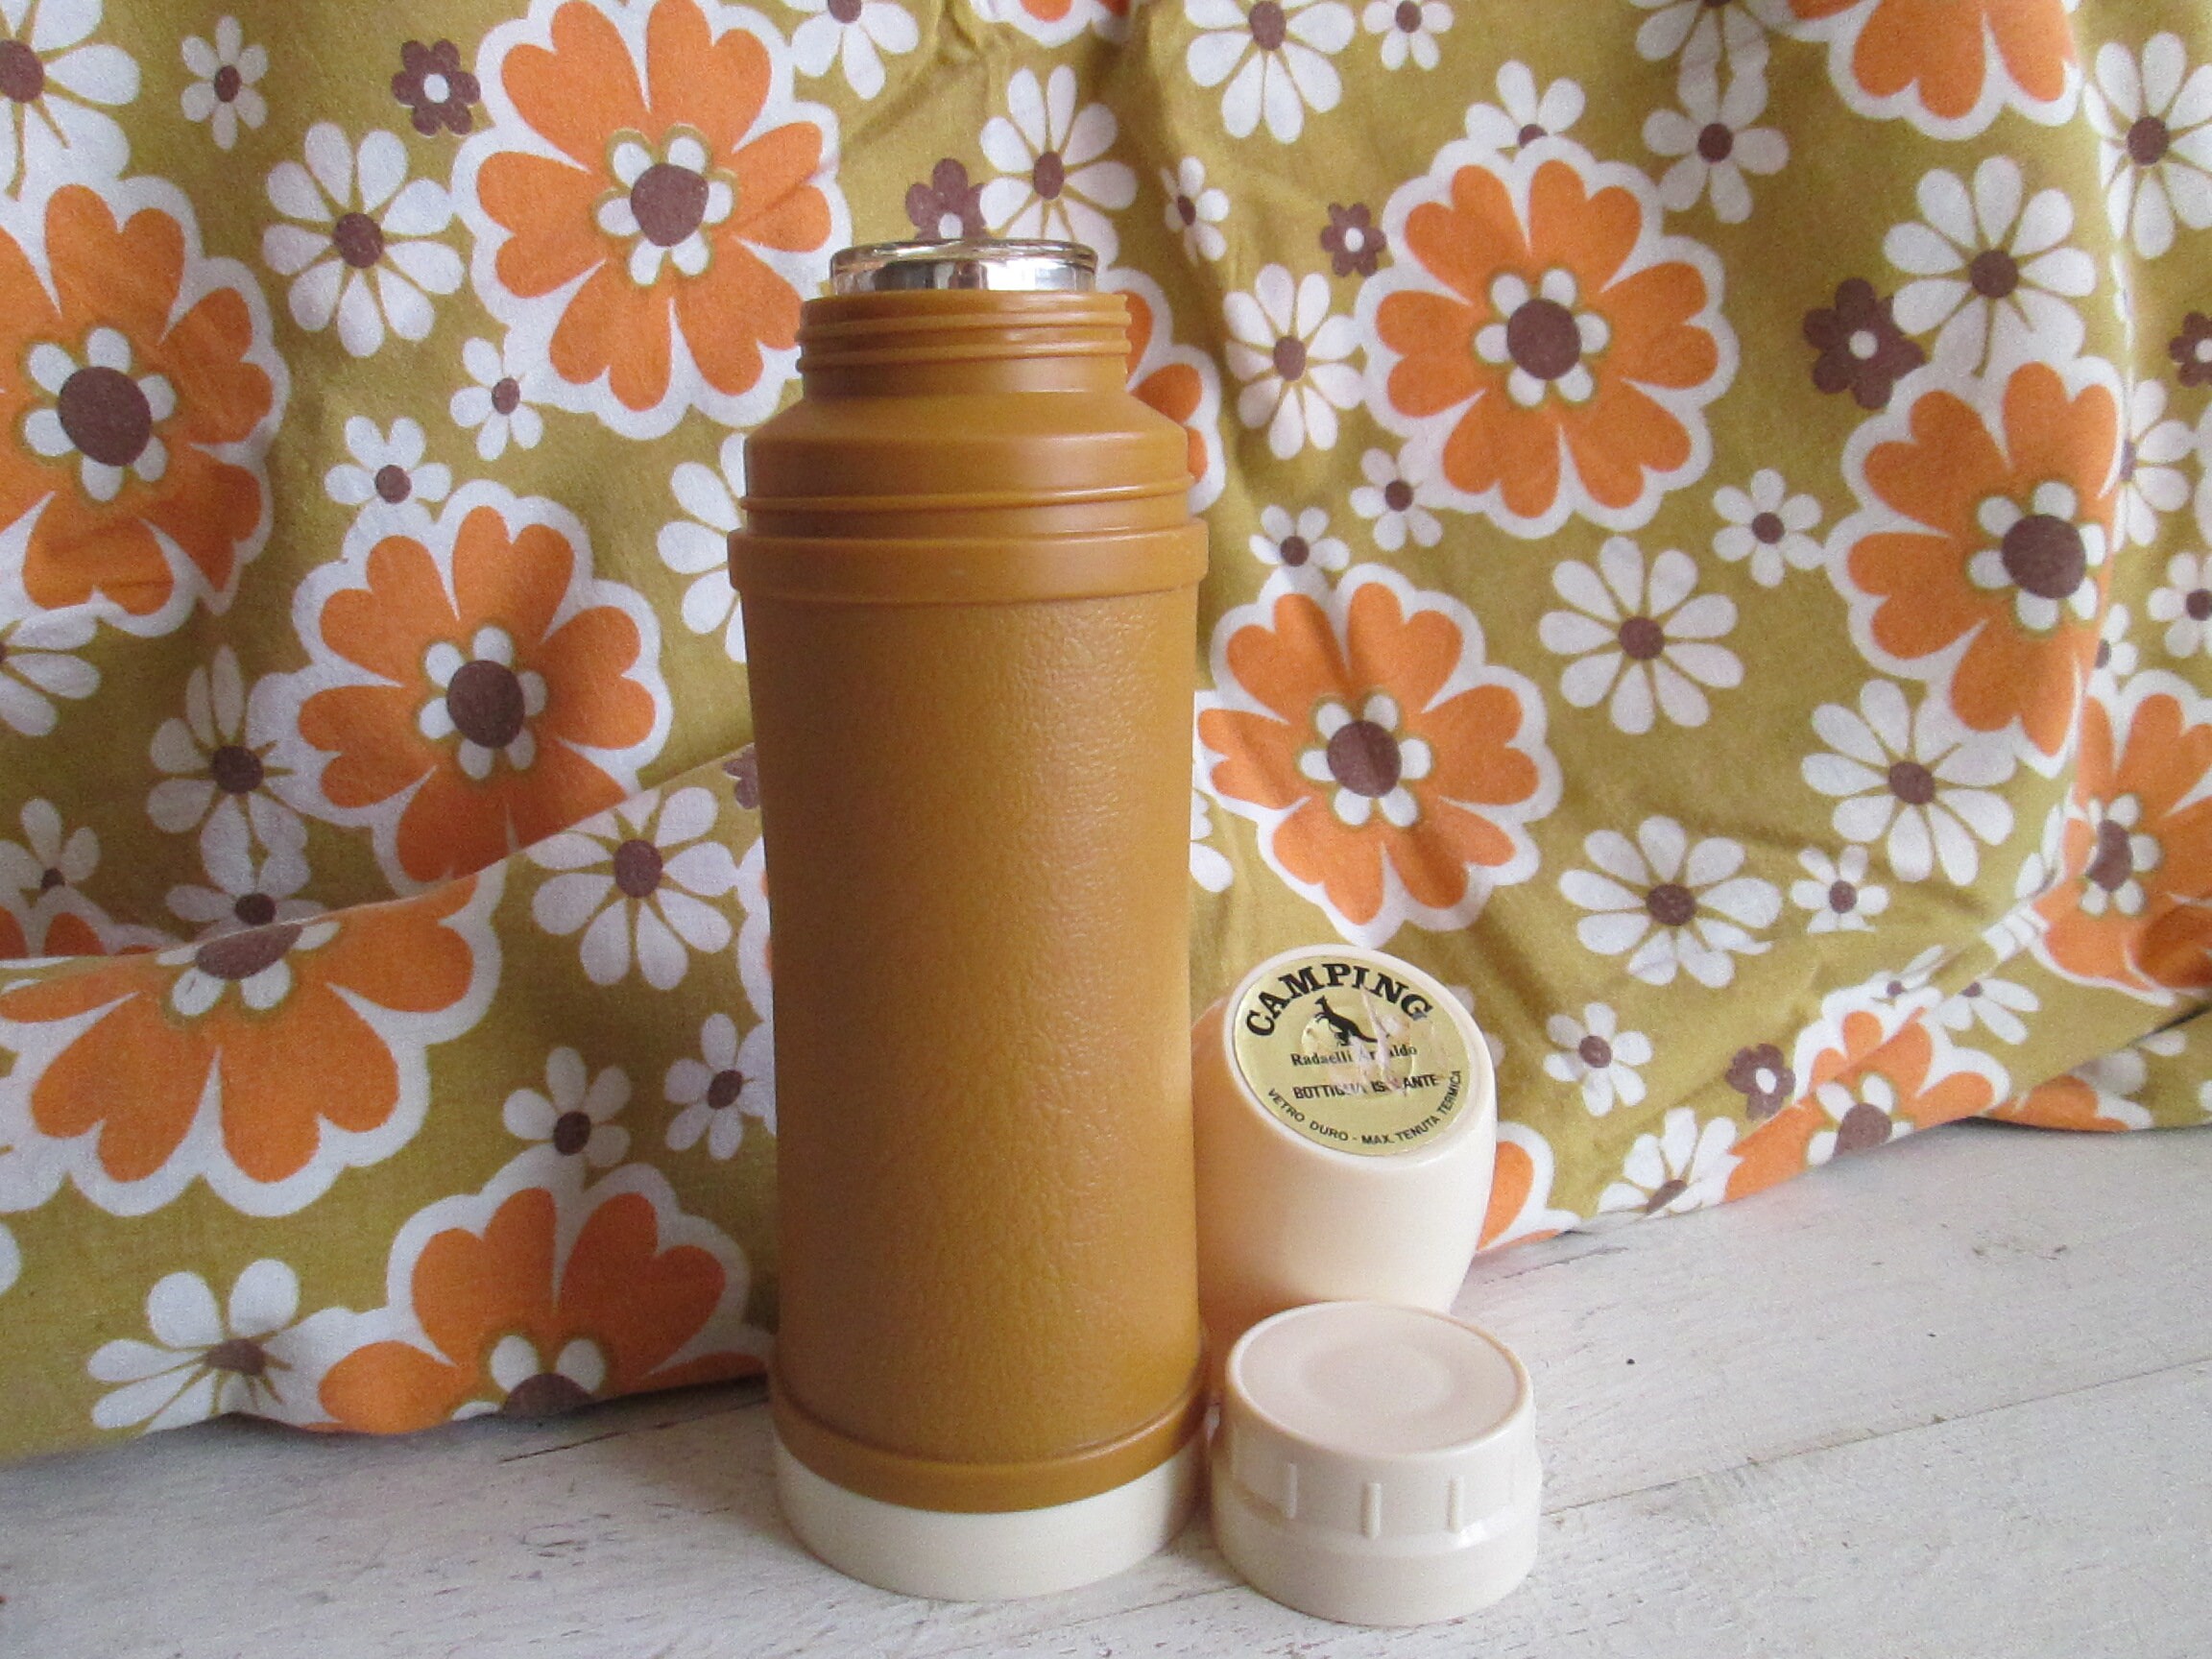 Vintage 1970 Mustard or Baby Blue Thermos Hot Drink Bottles -  Hong Kong